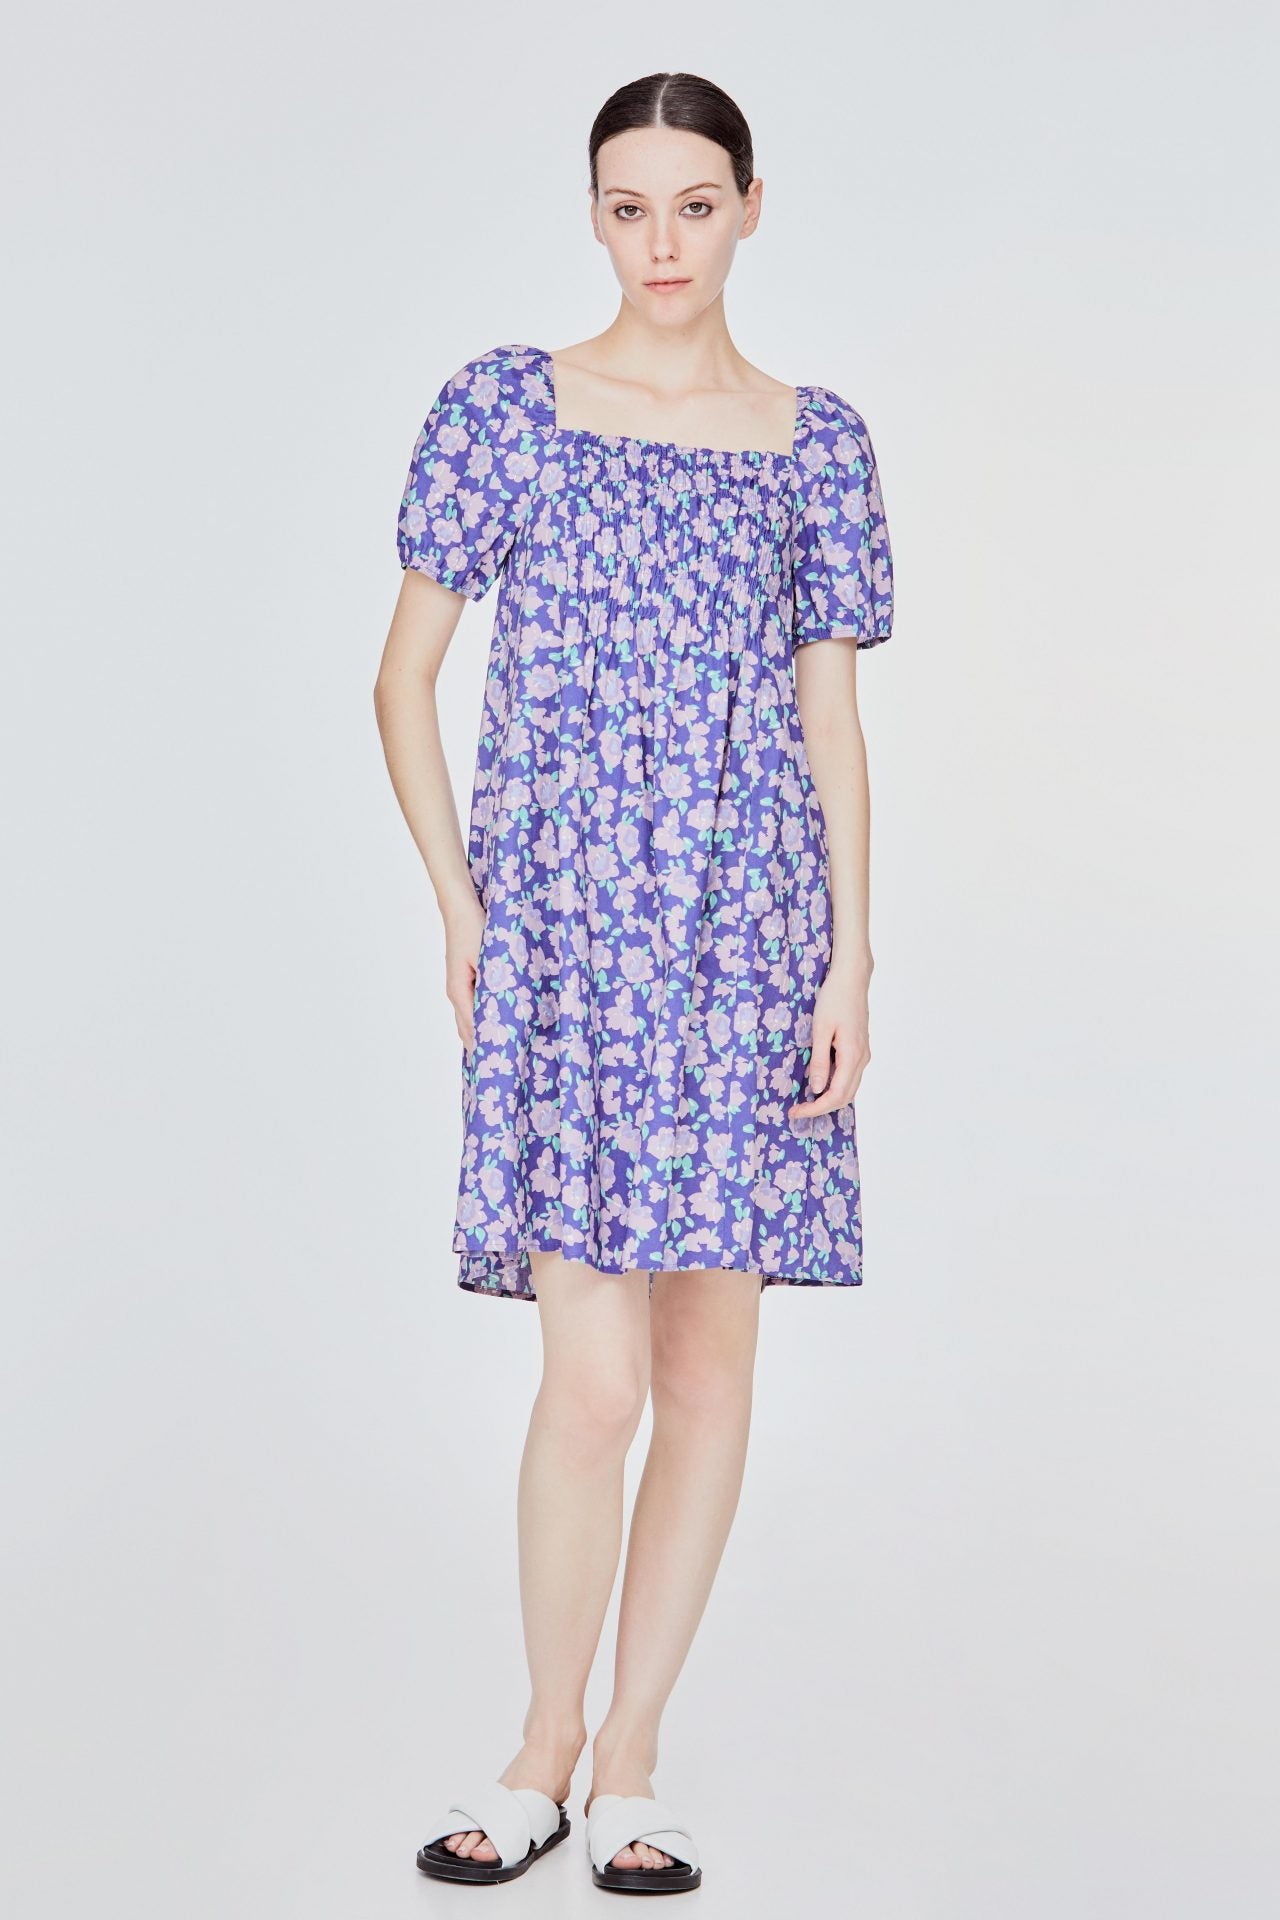 BDQ 11403 PUFF SLEEVE WITH RUCHING DETAIL LILAC FLORAL